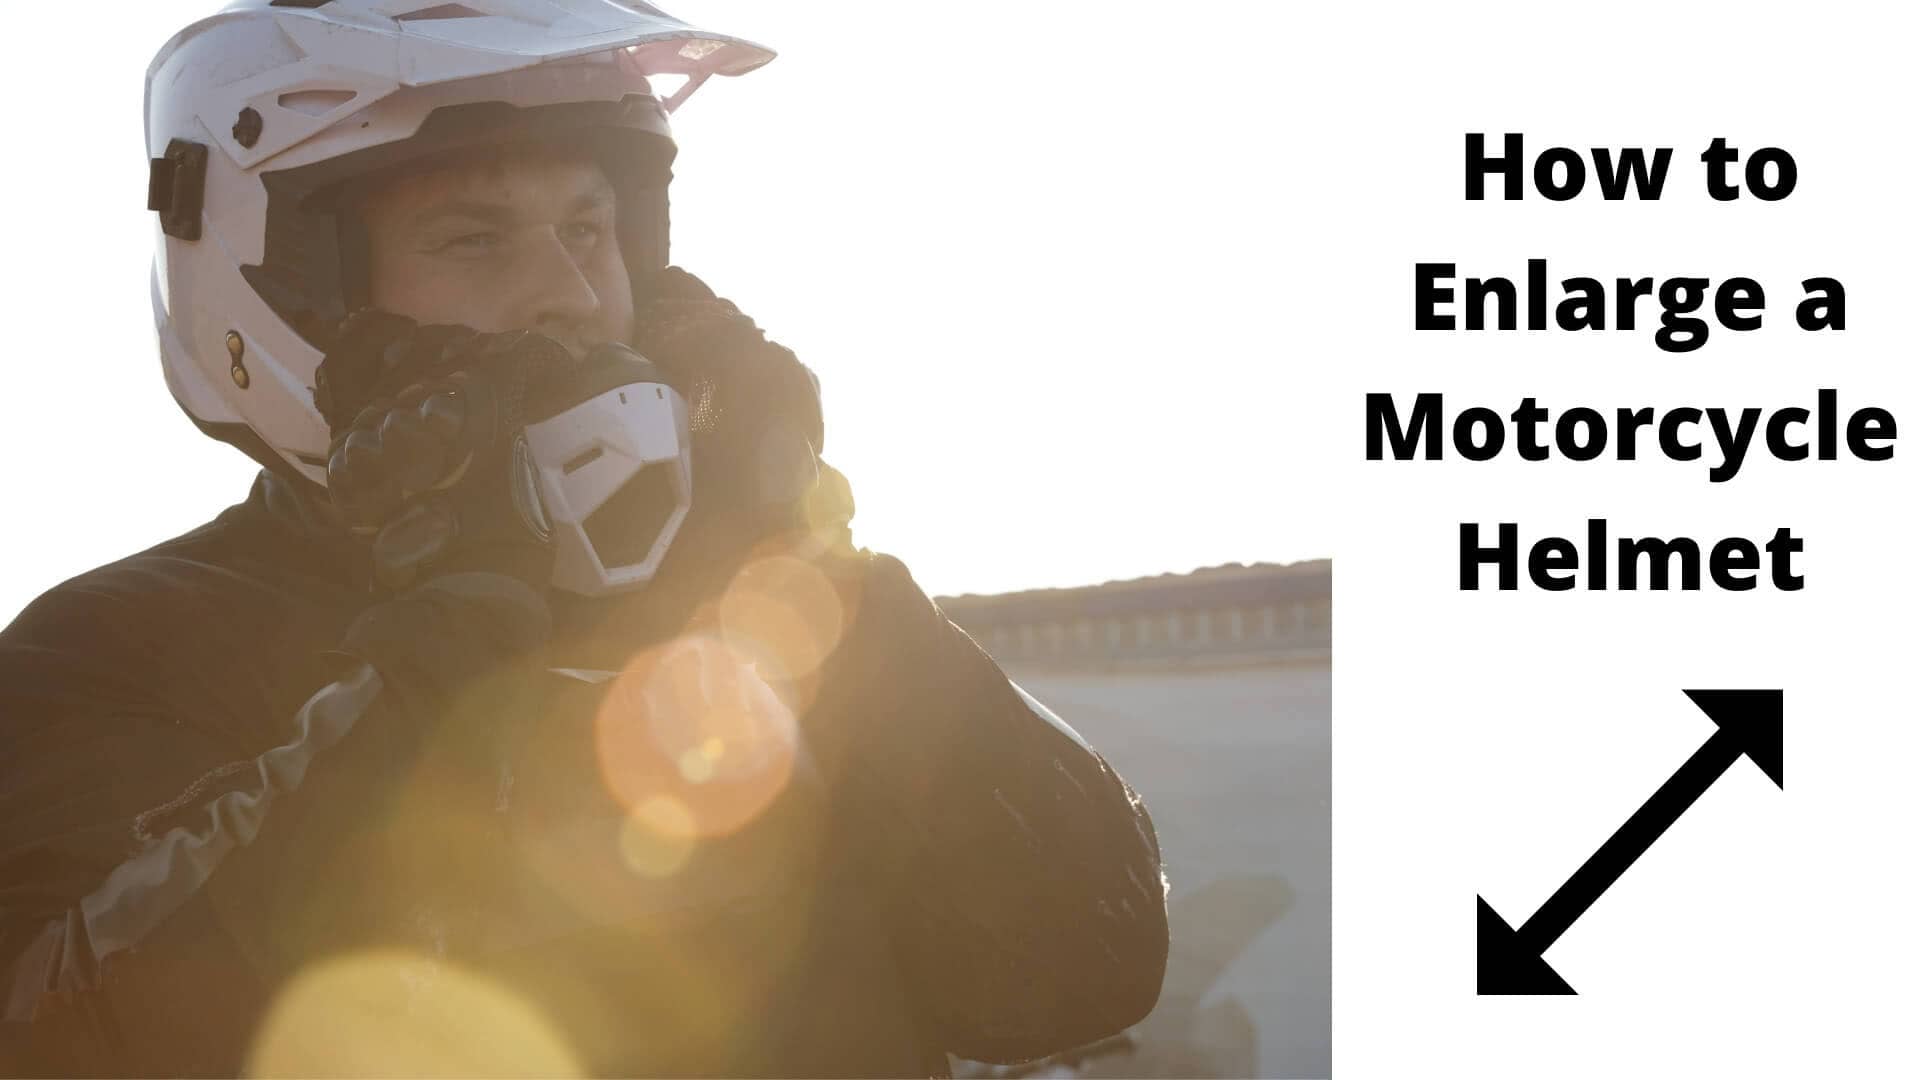 How To Enlarge A Motorcycle Helmet To Make It Fit Better